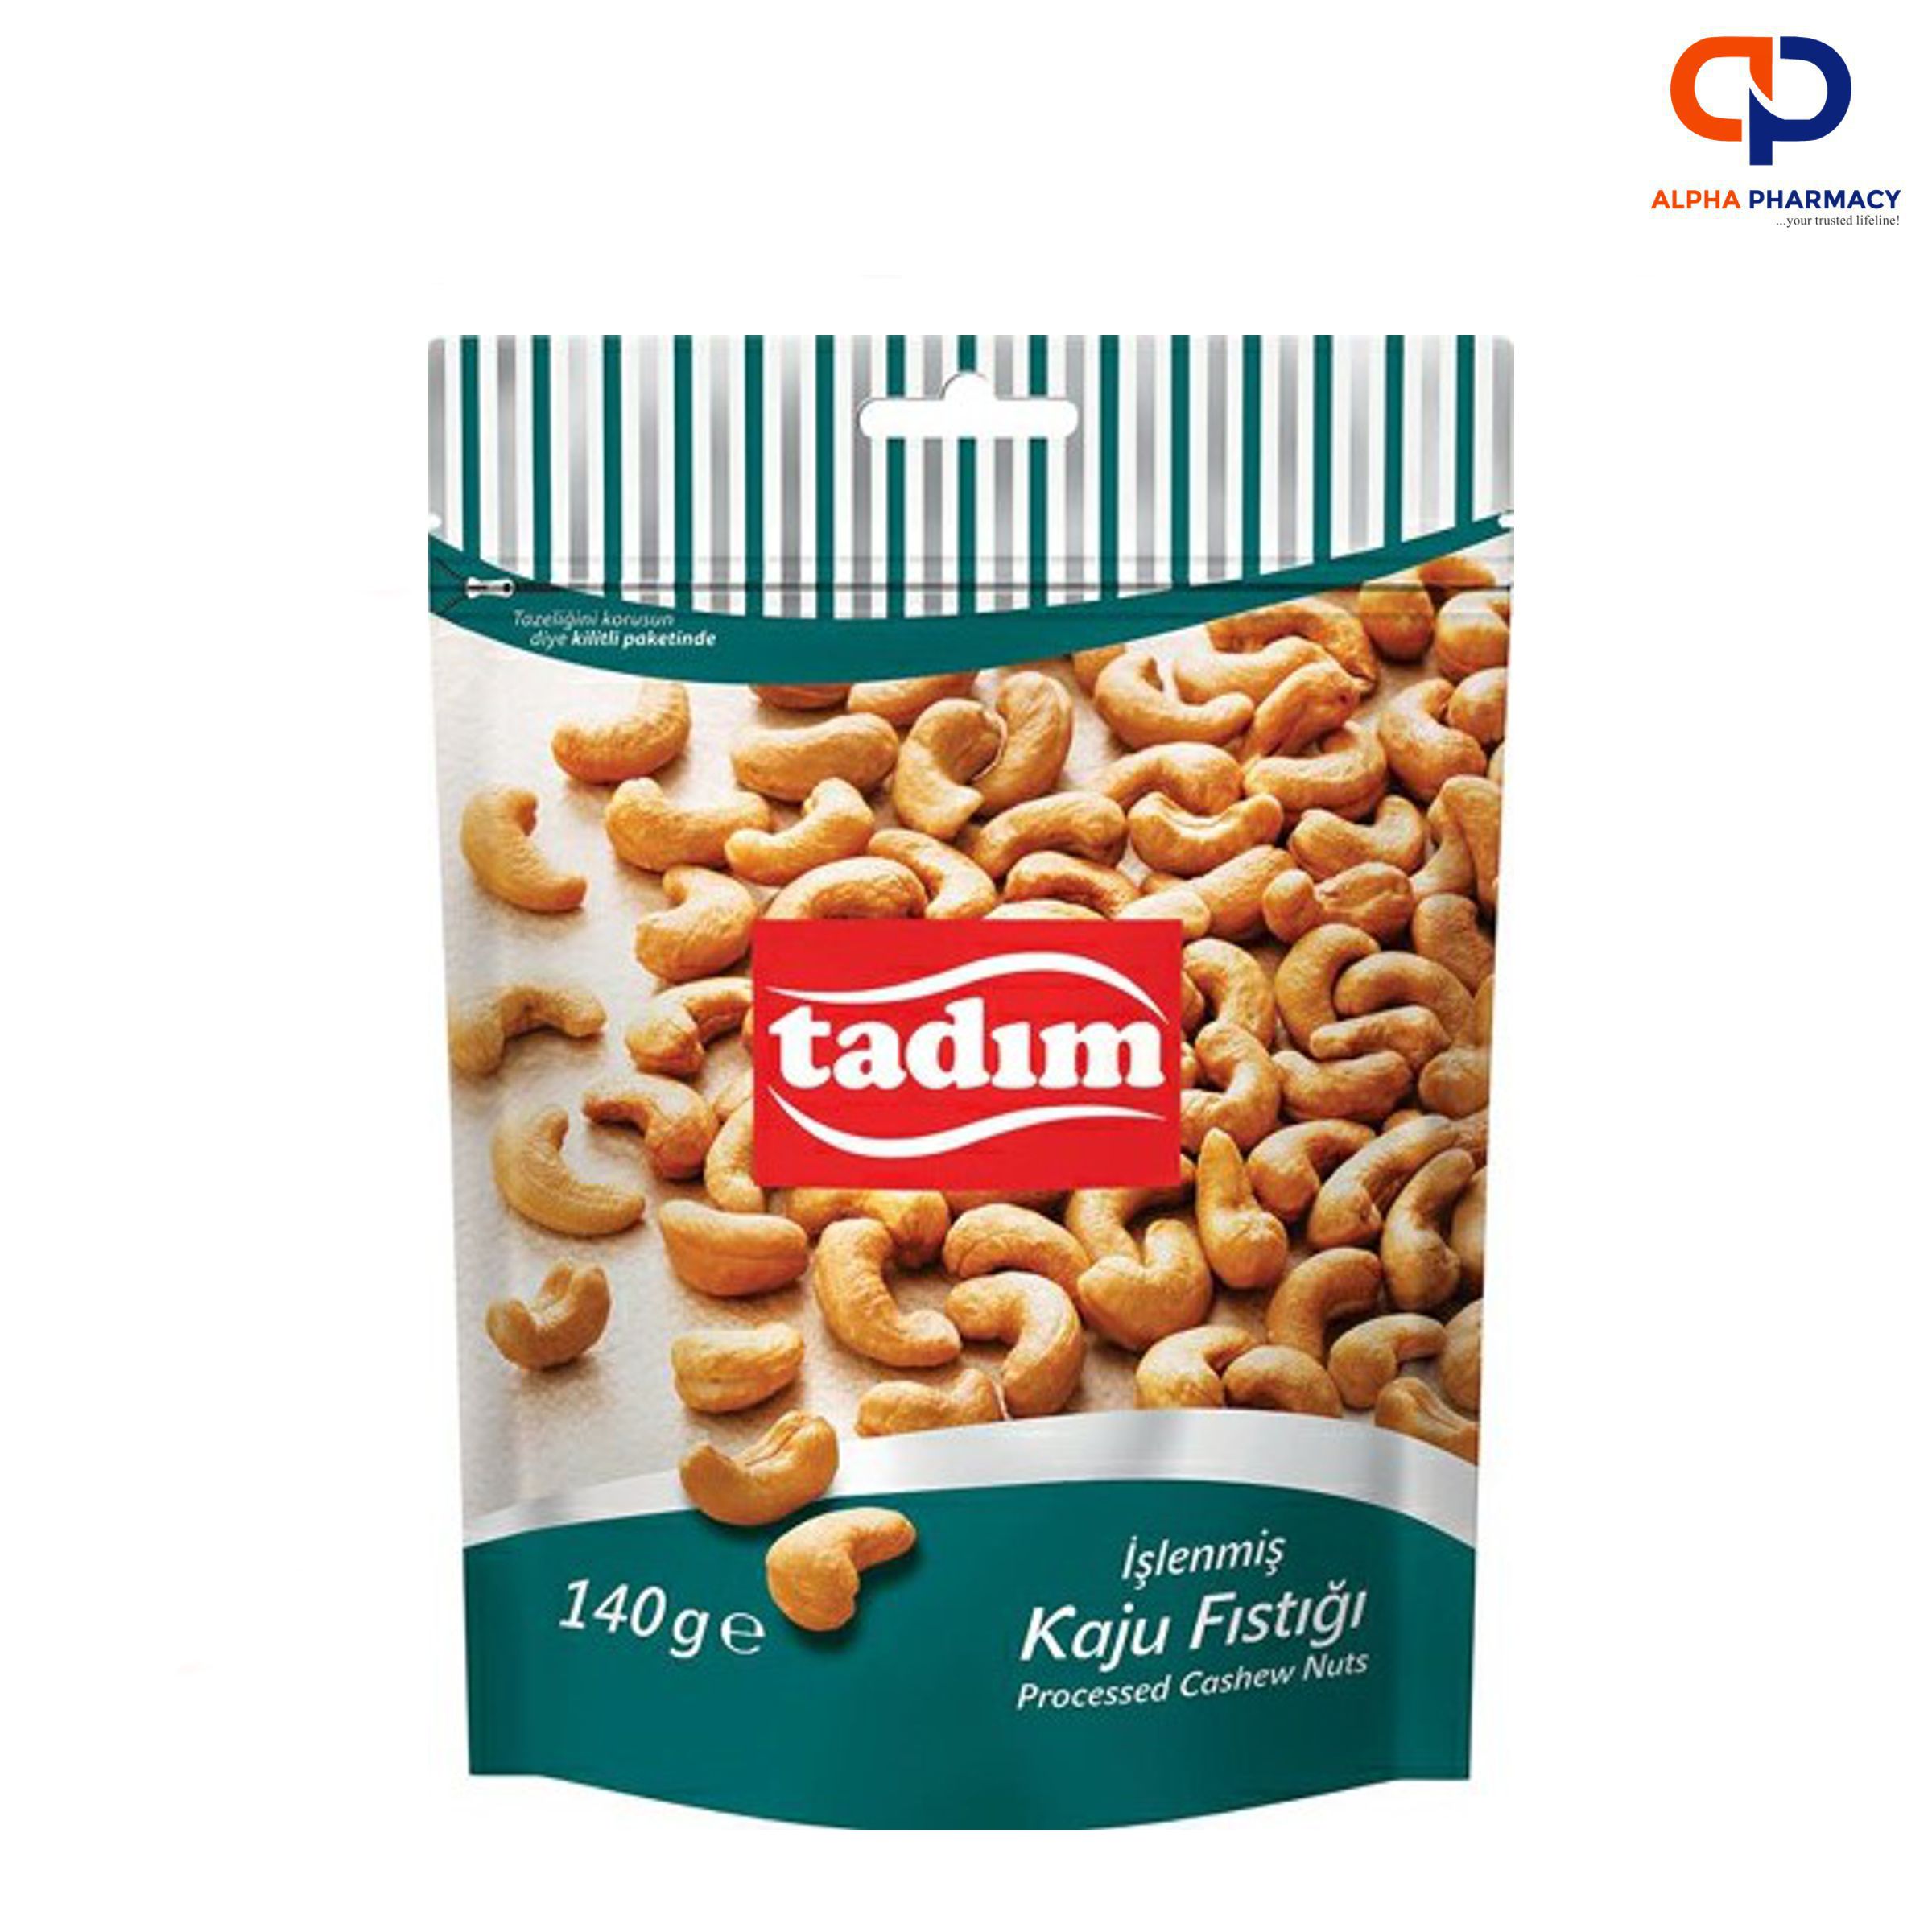 Tadim Roasted and Salted Cashew Nuts 140g